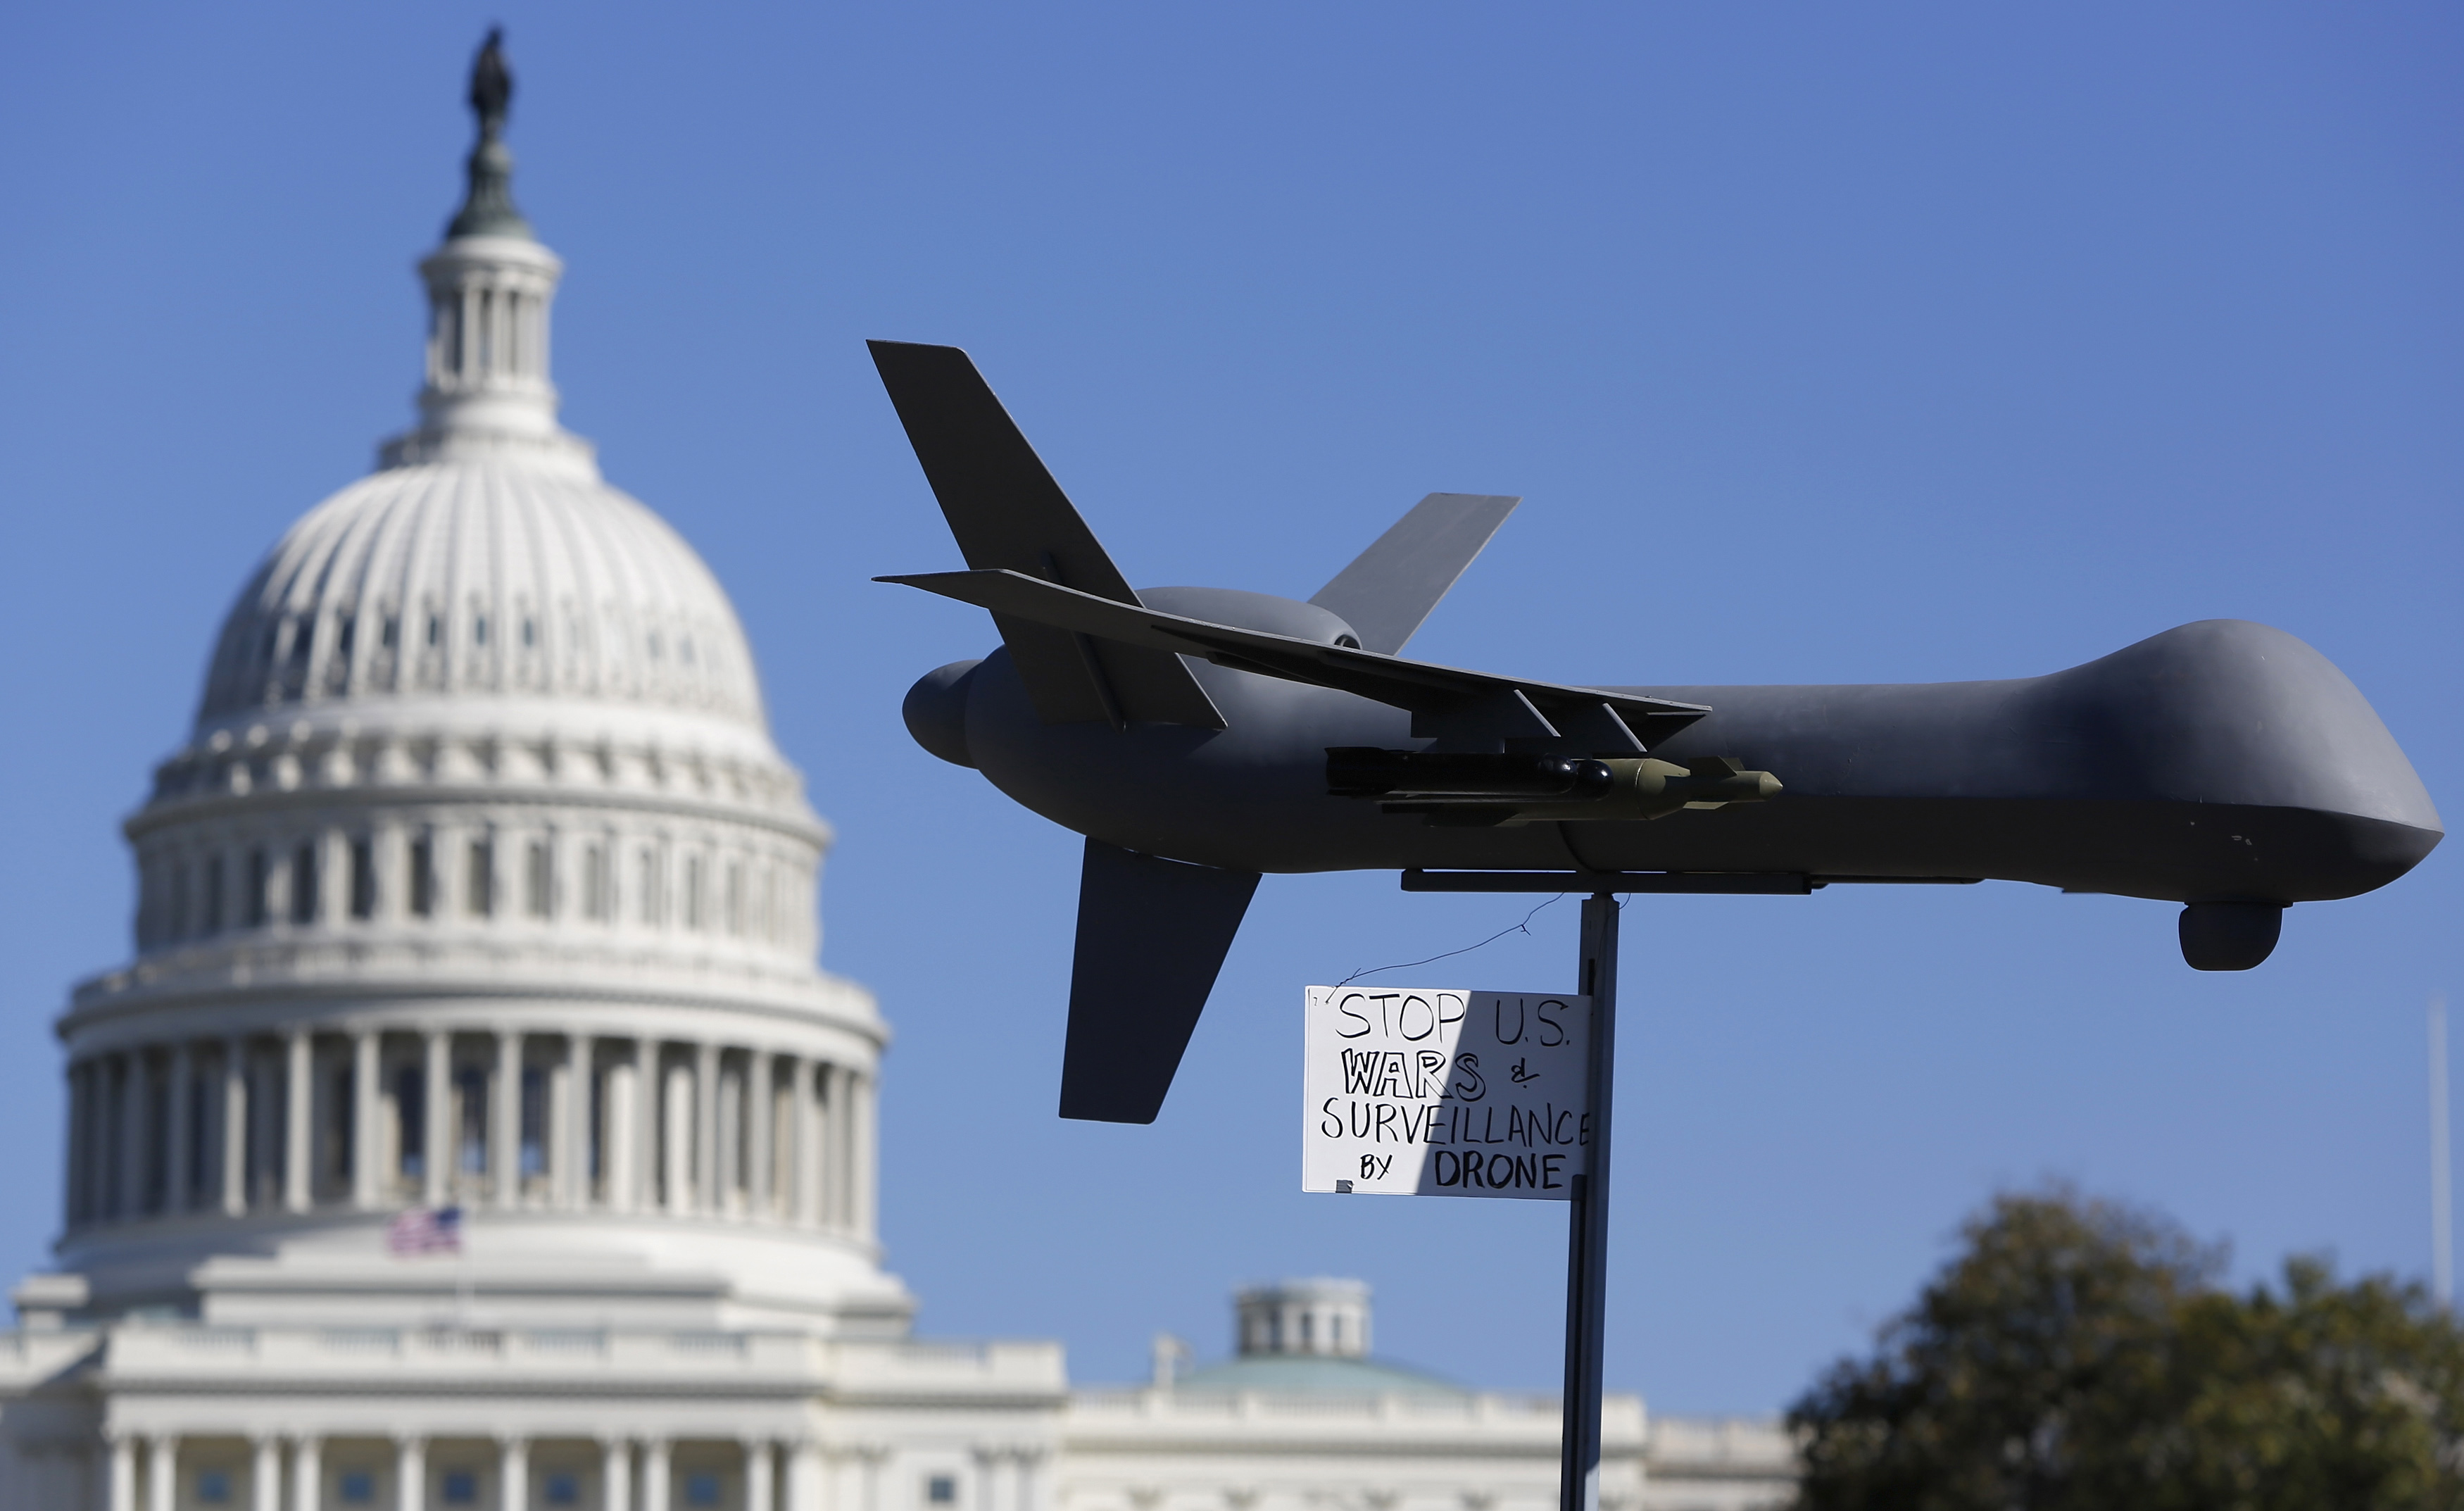 Demonstrators deploy a model of a U.S. drone aircraft at the "Stop Watching Us: A Rally Against Mass Surveillance" near the U.S. Capitol in Washington, Oct. 26, 2013 (Jonathan Ernst—Reuters)